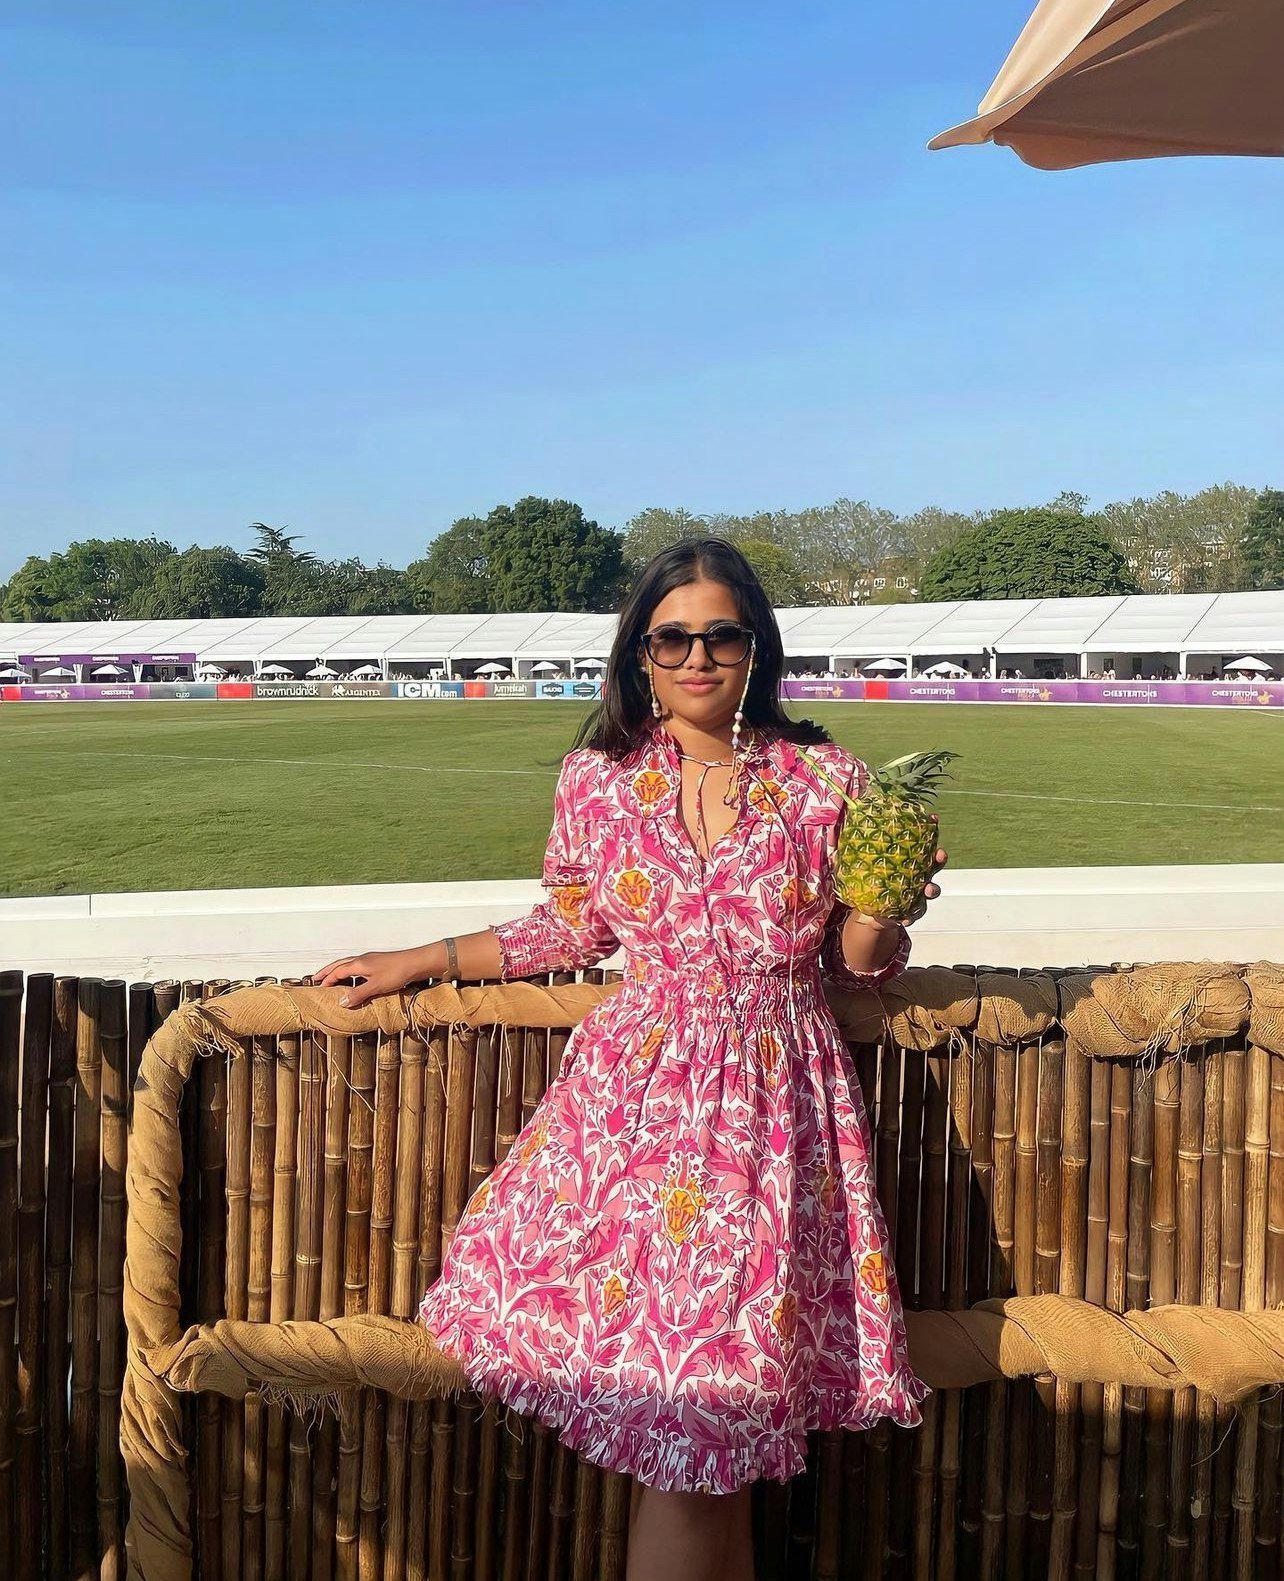 Pineapples at the ready! 🍍 
We LOVE seeing all of your #mahikimoments in our Mahiki enclosures🌞 

@rusticandrolex
caminho.da.indi 
@robauton1990

#mahikievents #mahikioutposts #summer2024 #summerparty #polointhepark #henleyregatta #silverstone